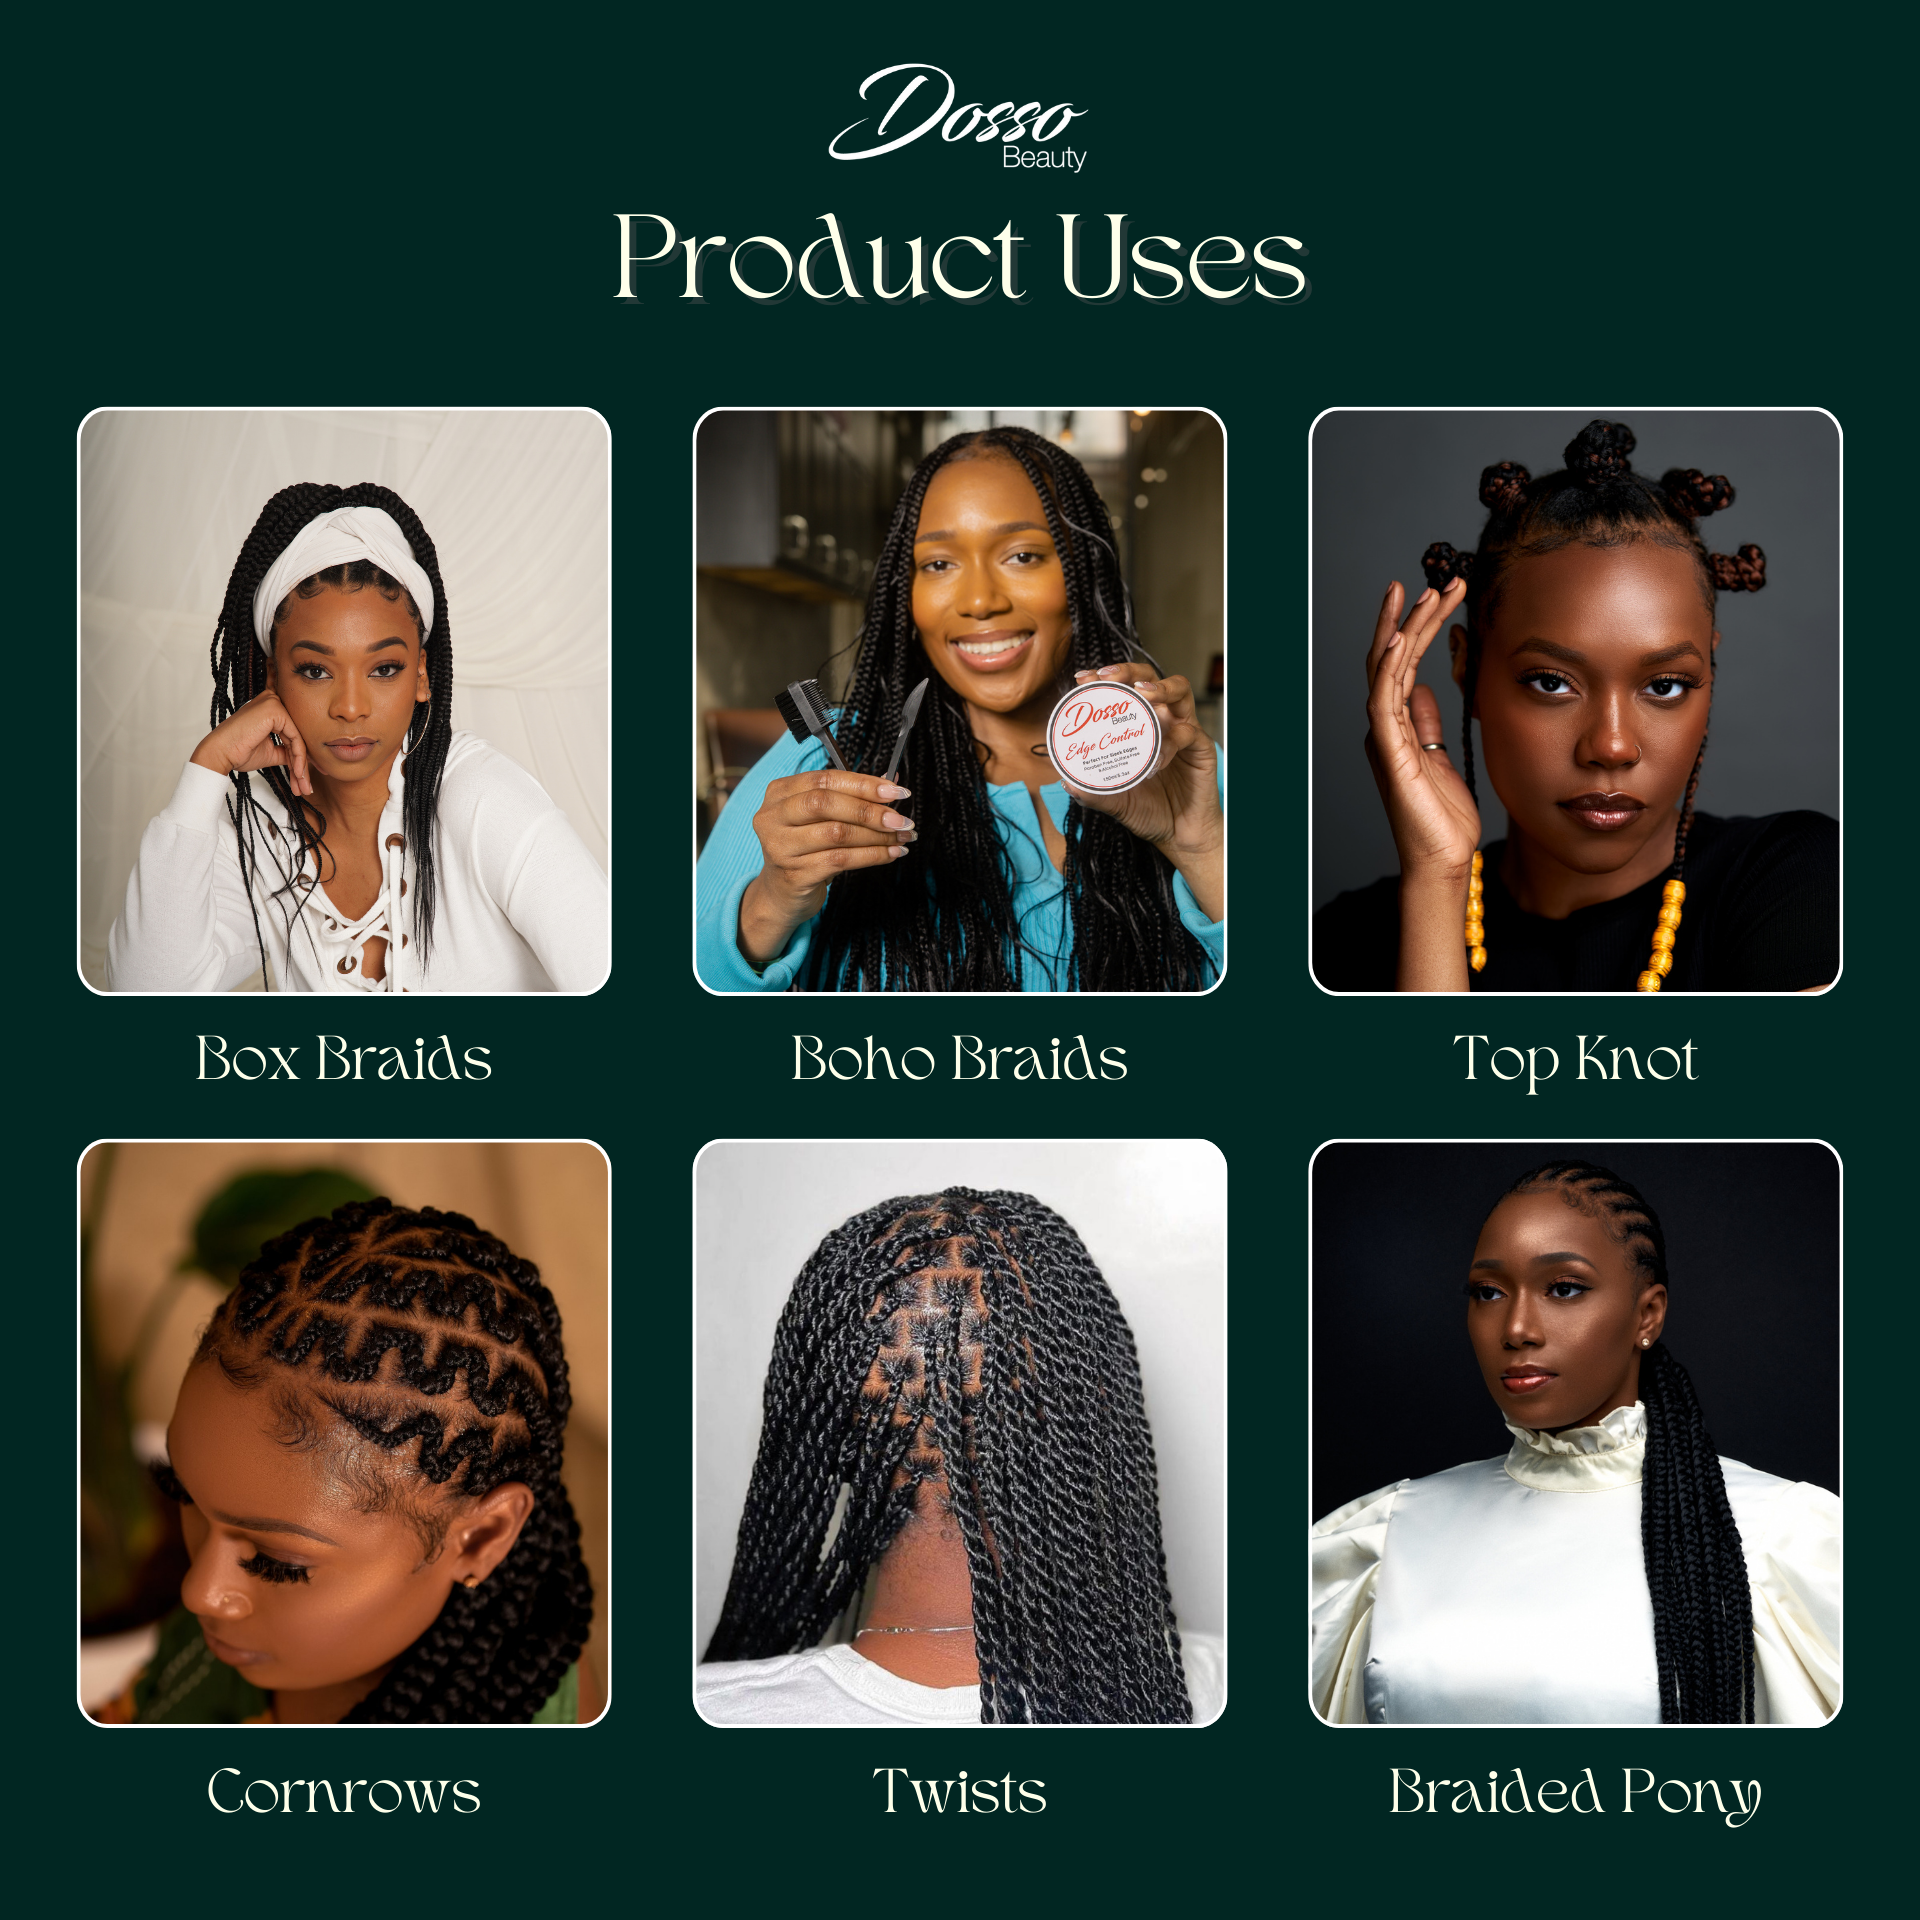 Dosso Beauty hypoallergenic Braiding Hair Product Uses